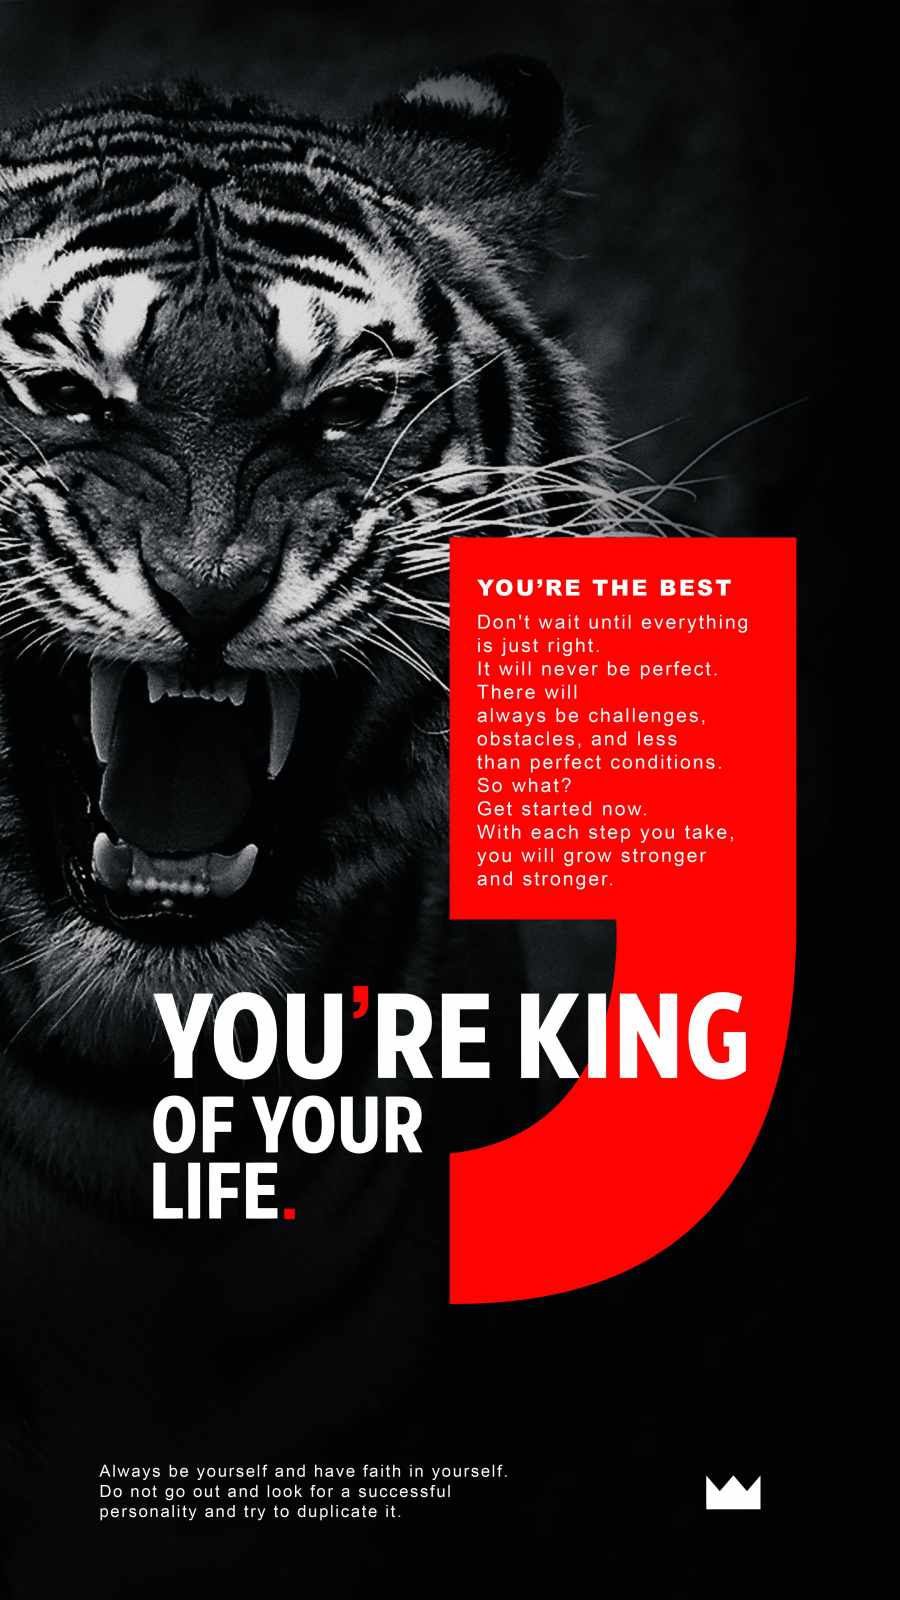 You Are King of your Life